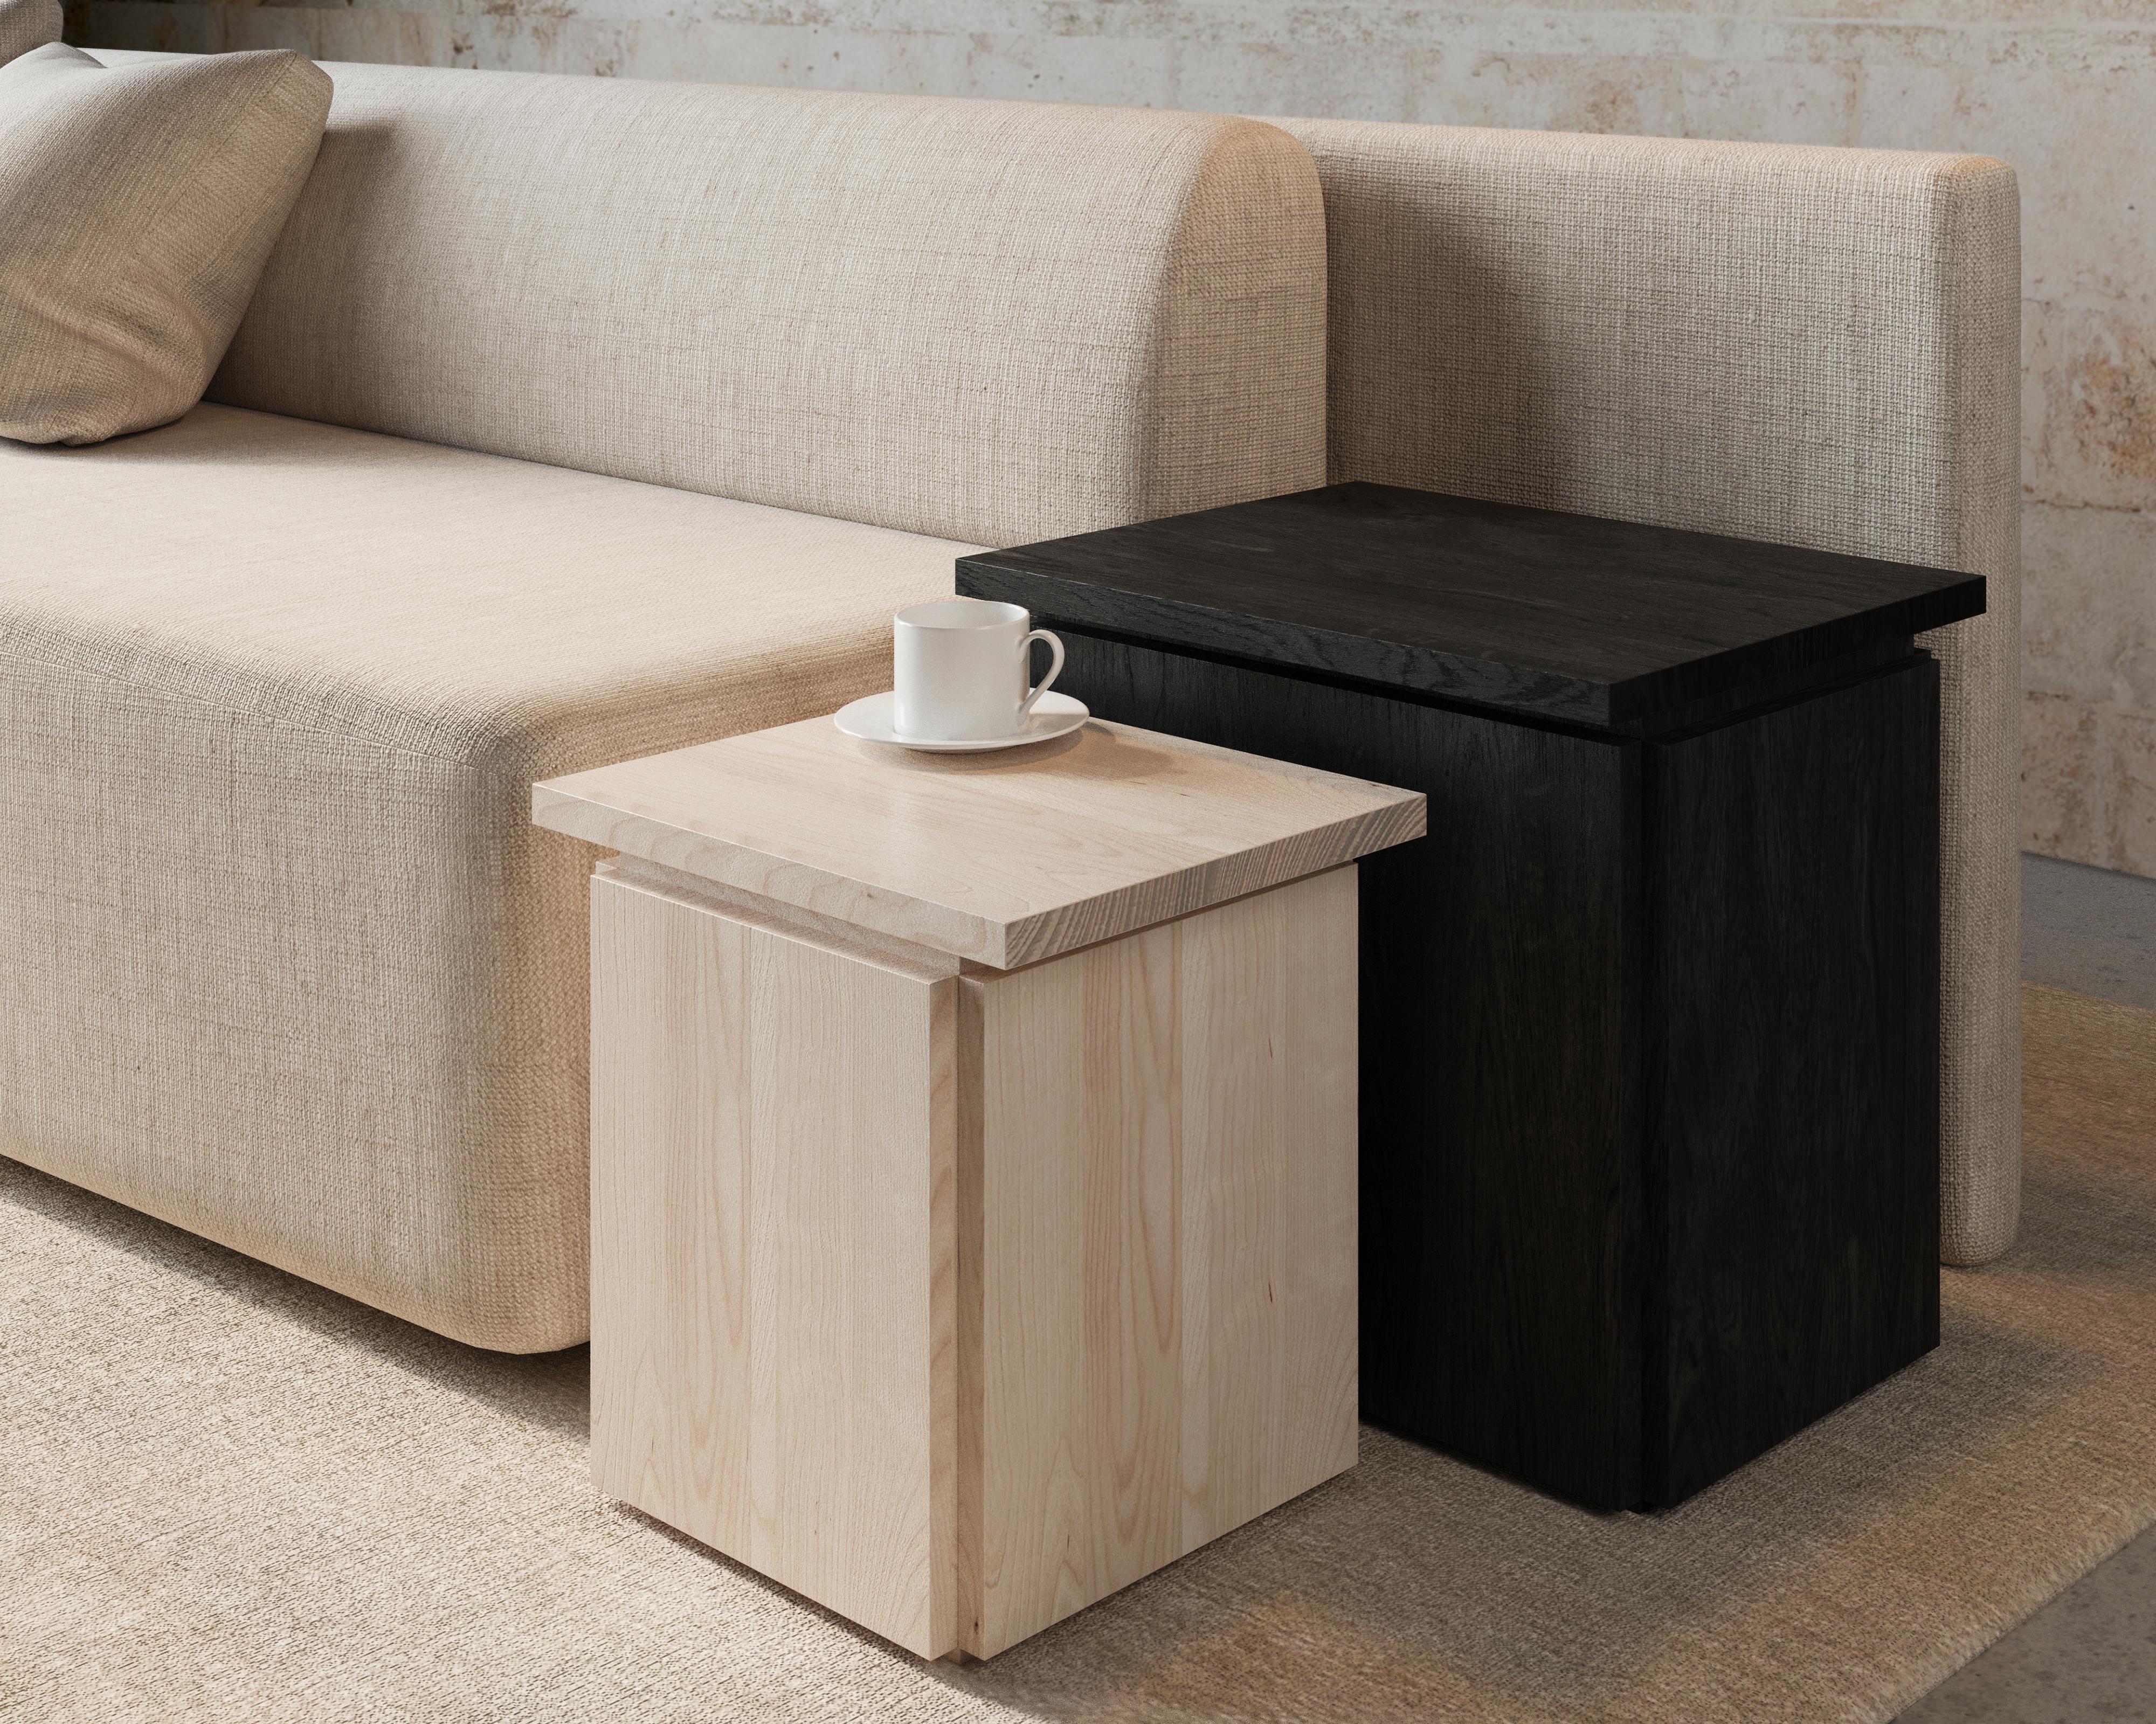 The slab side table showcases a geometric shapes and clean lines.

A simple plinth base and floating top emphasize the organic richness of the wood surfaces. The wood brings warmth to the modern silhouette and the offset corners create depth. This